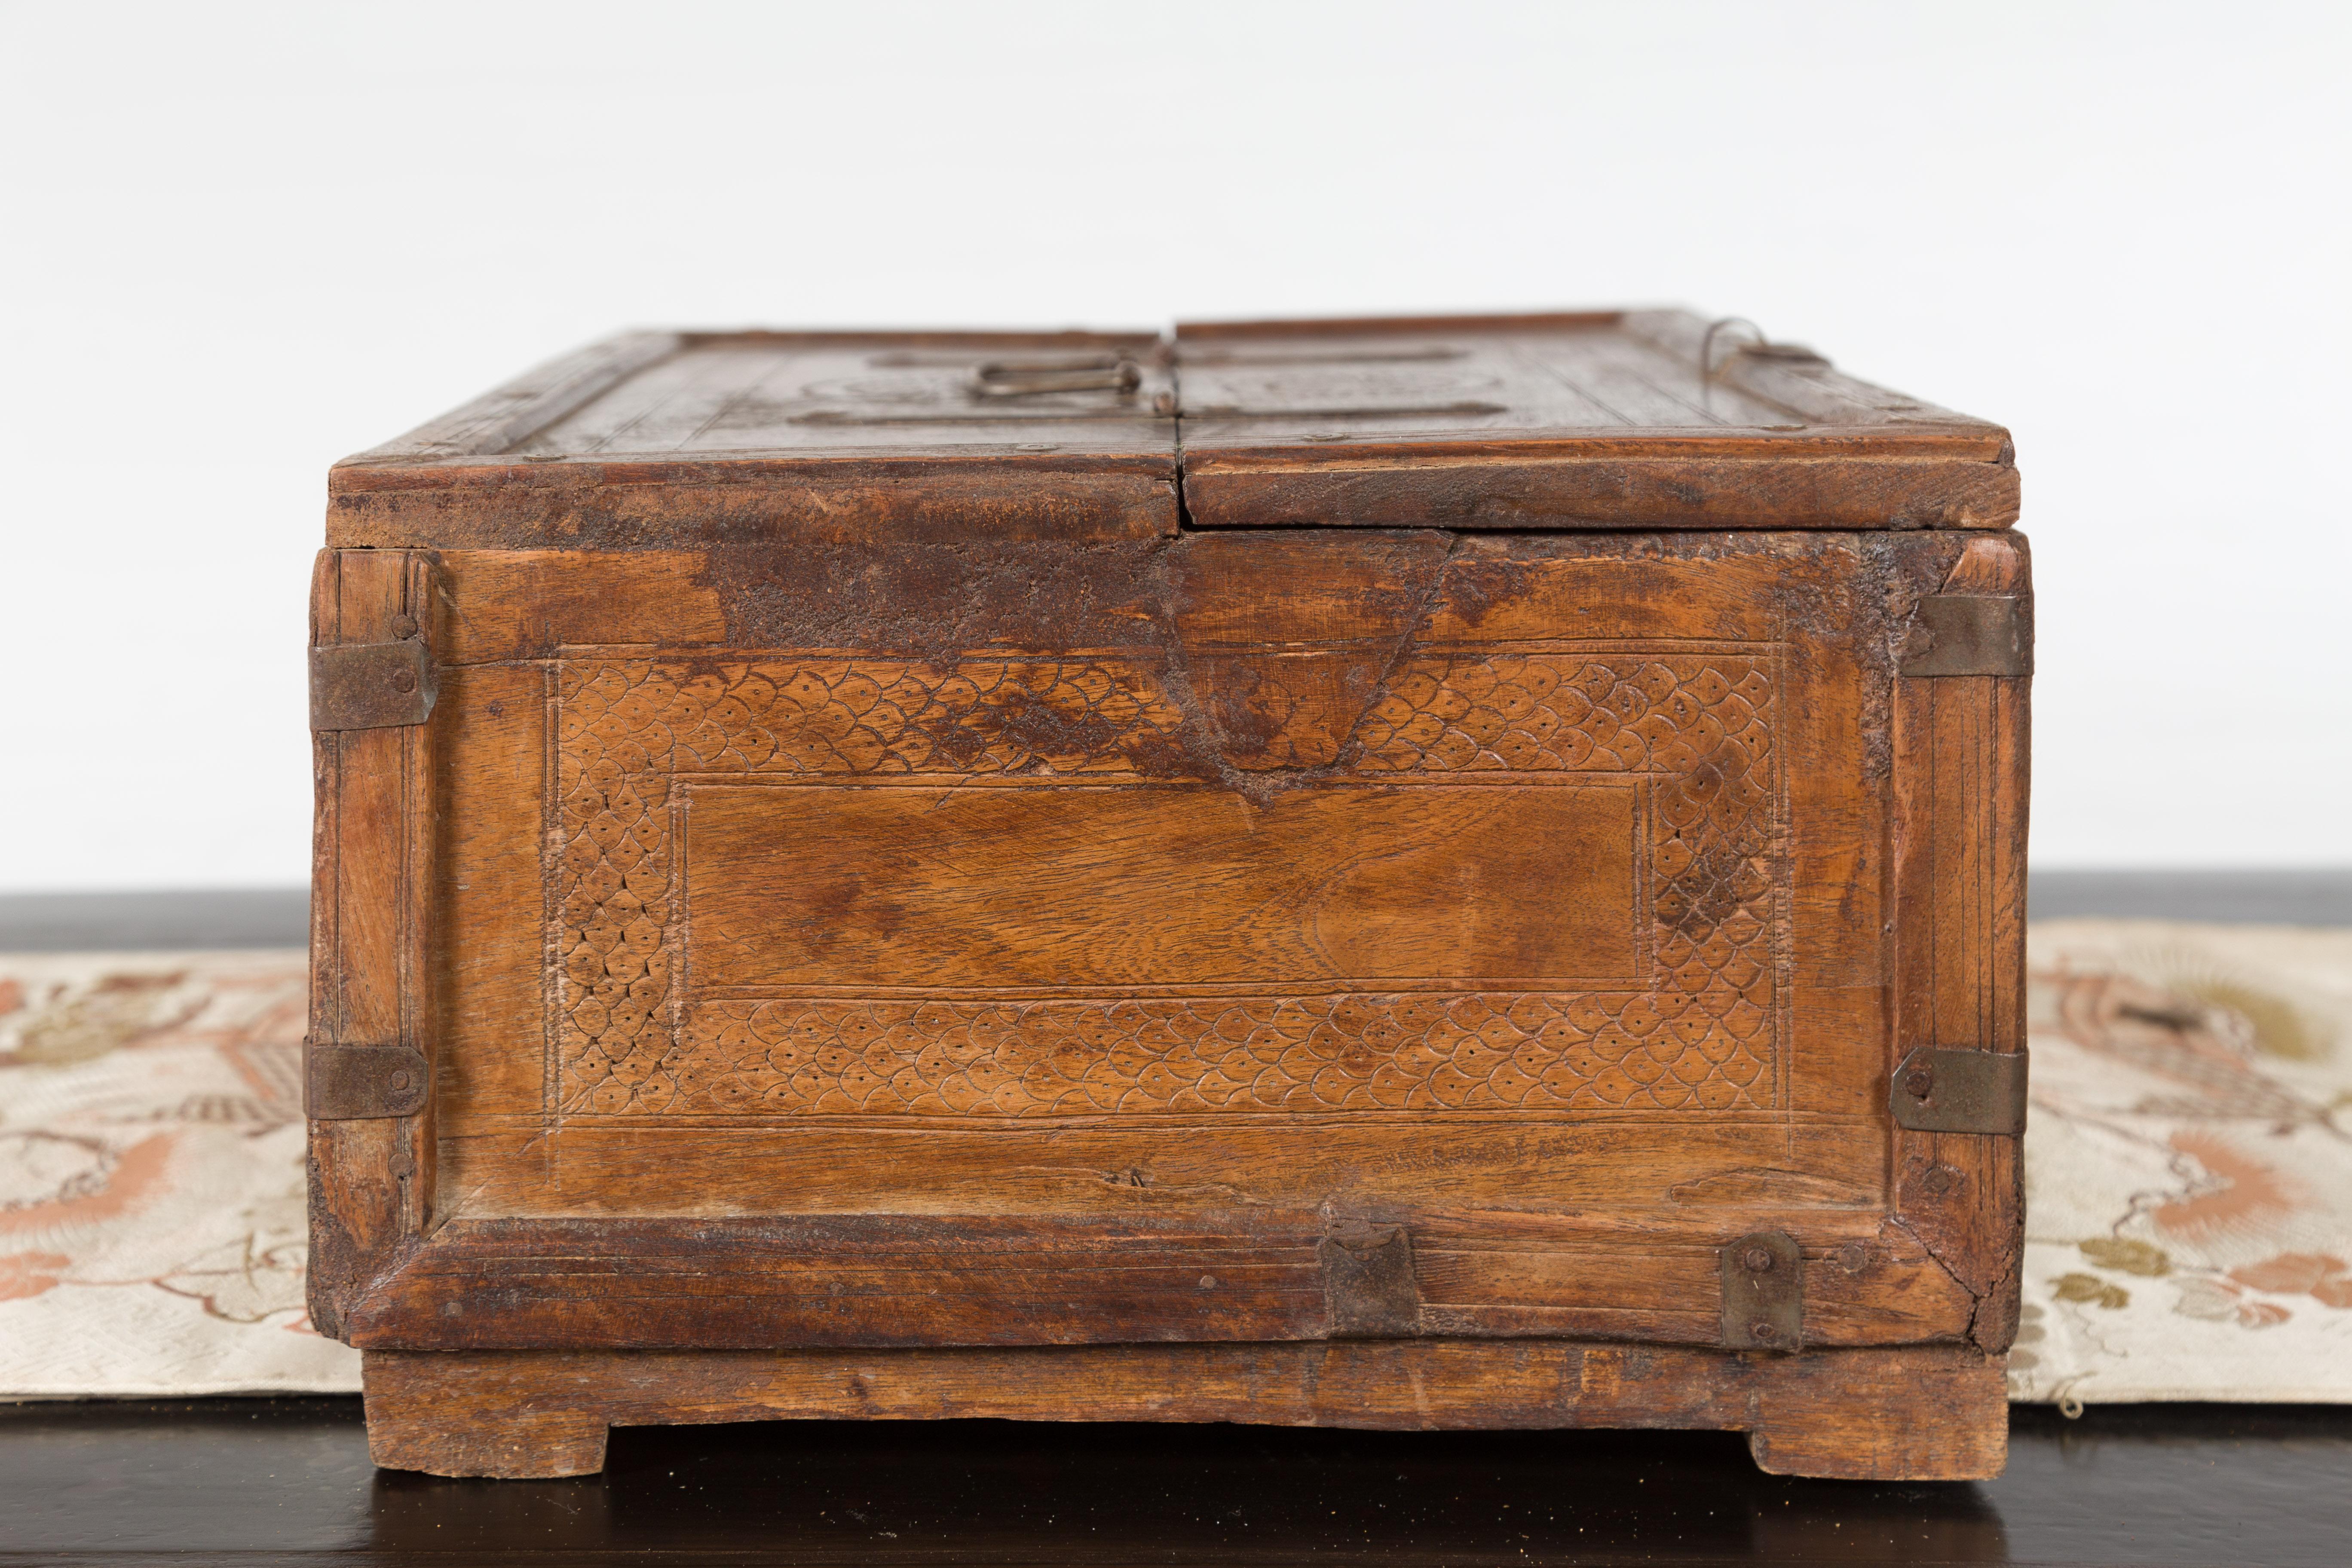 19th Century Indian Wooden Box with Incised Motifs and Distressed Patina 1